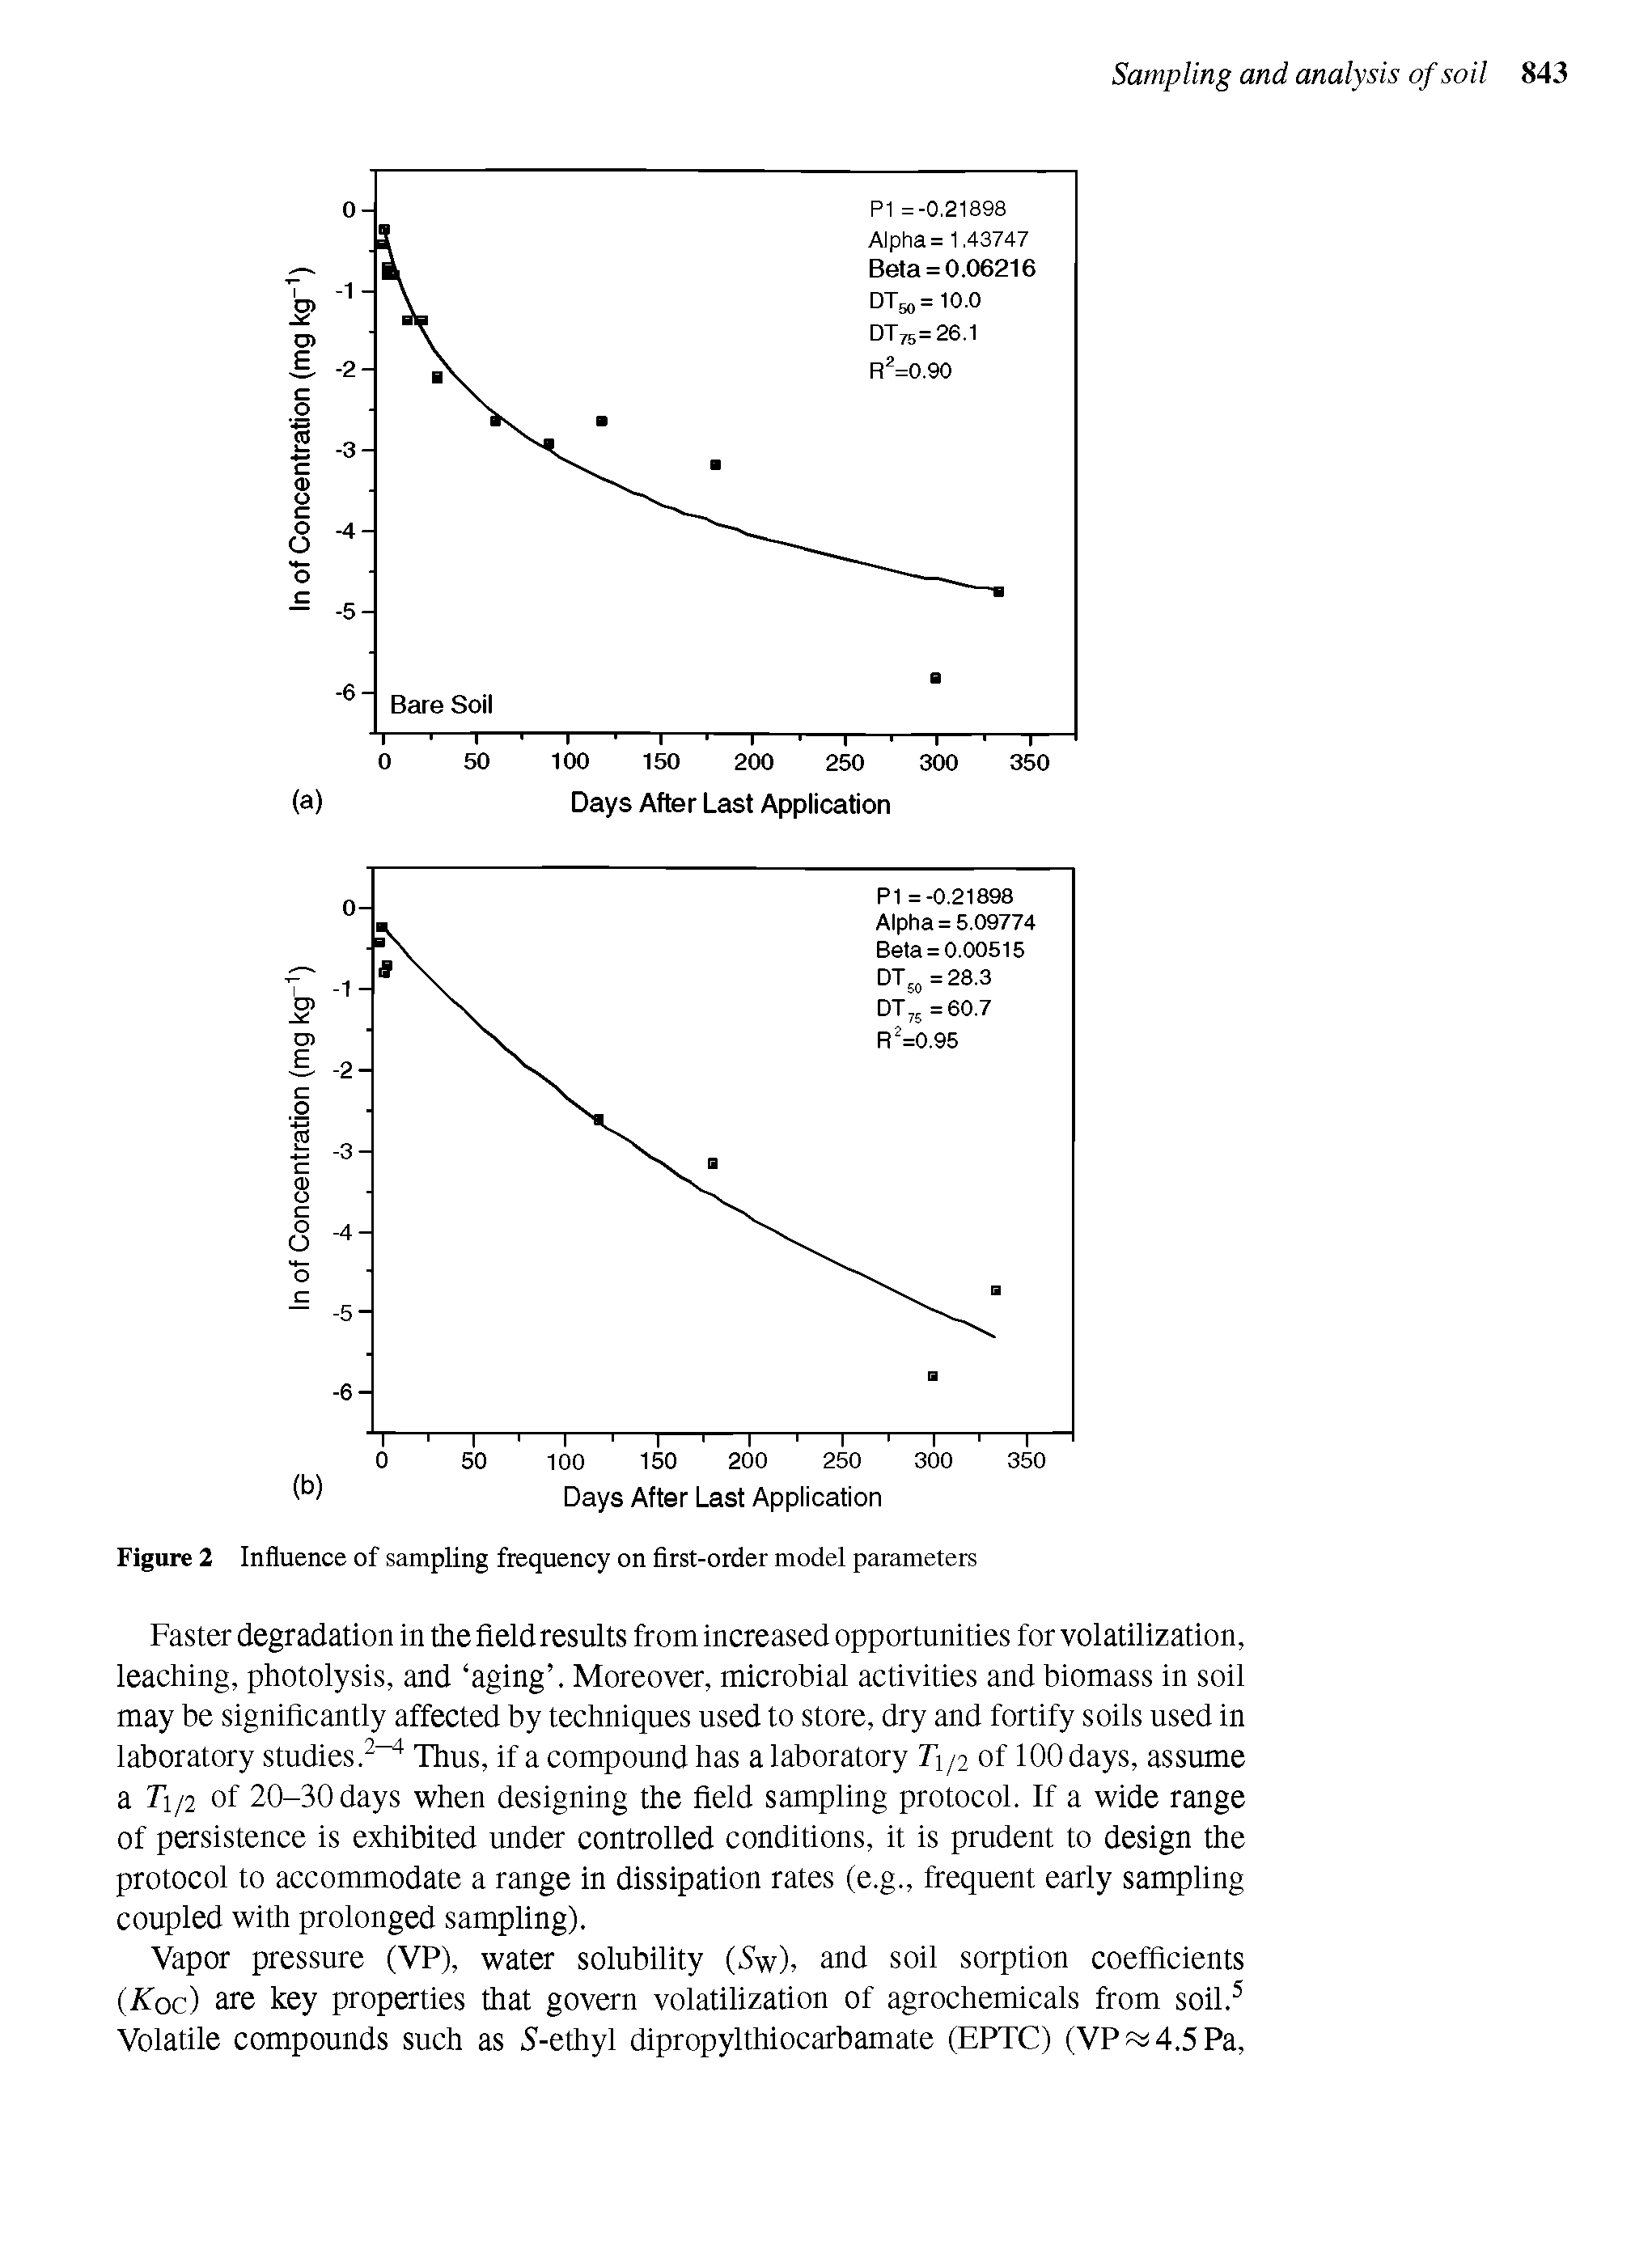 Figure 2 Influence of sampling frequency on first-order model parameters...